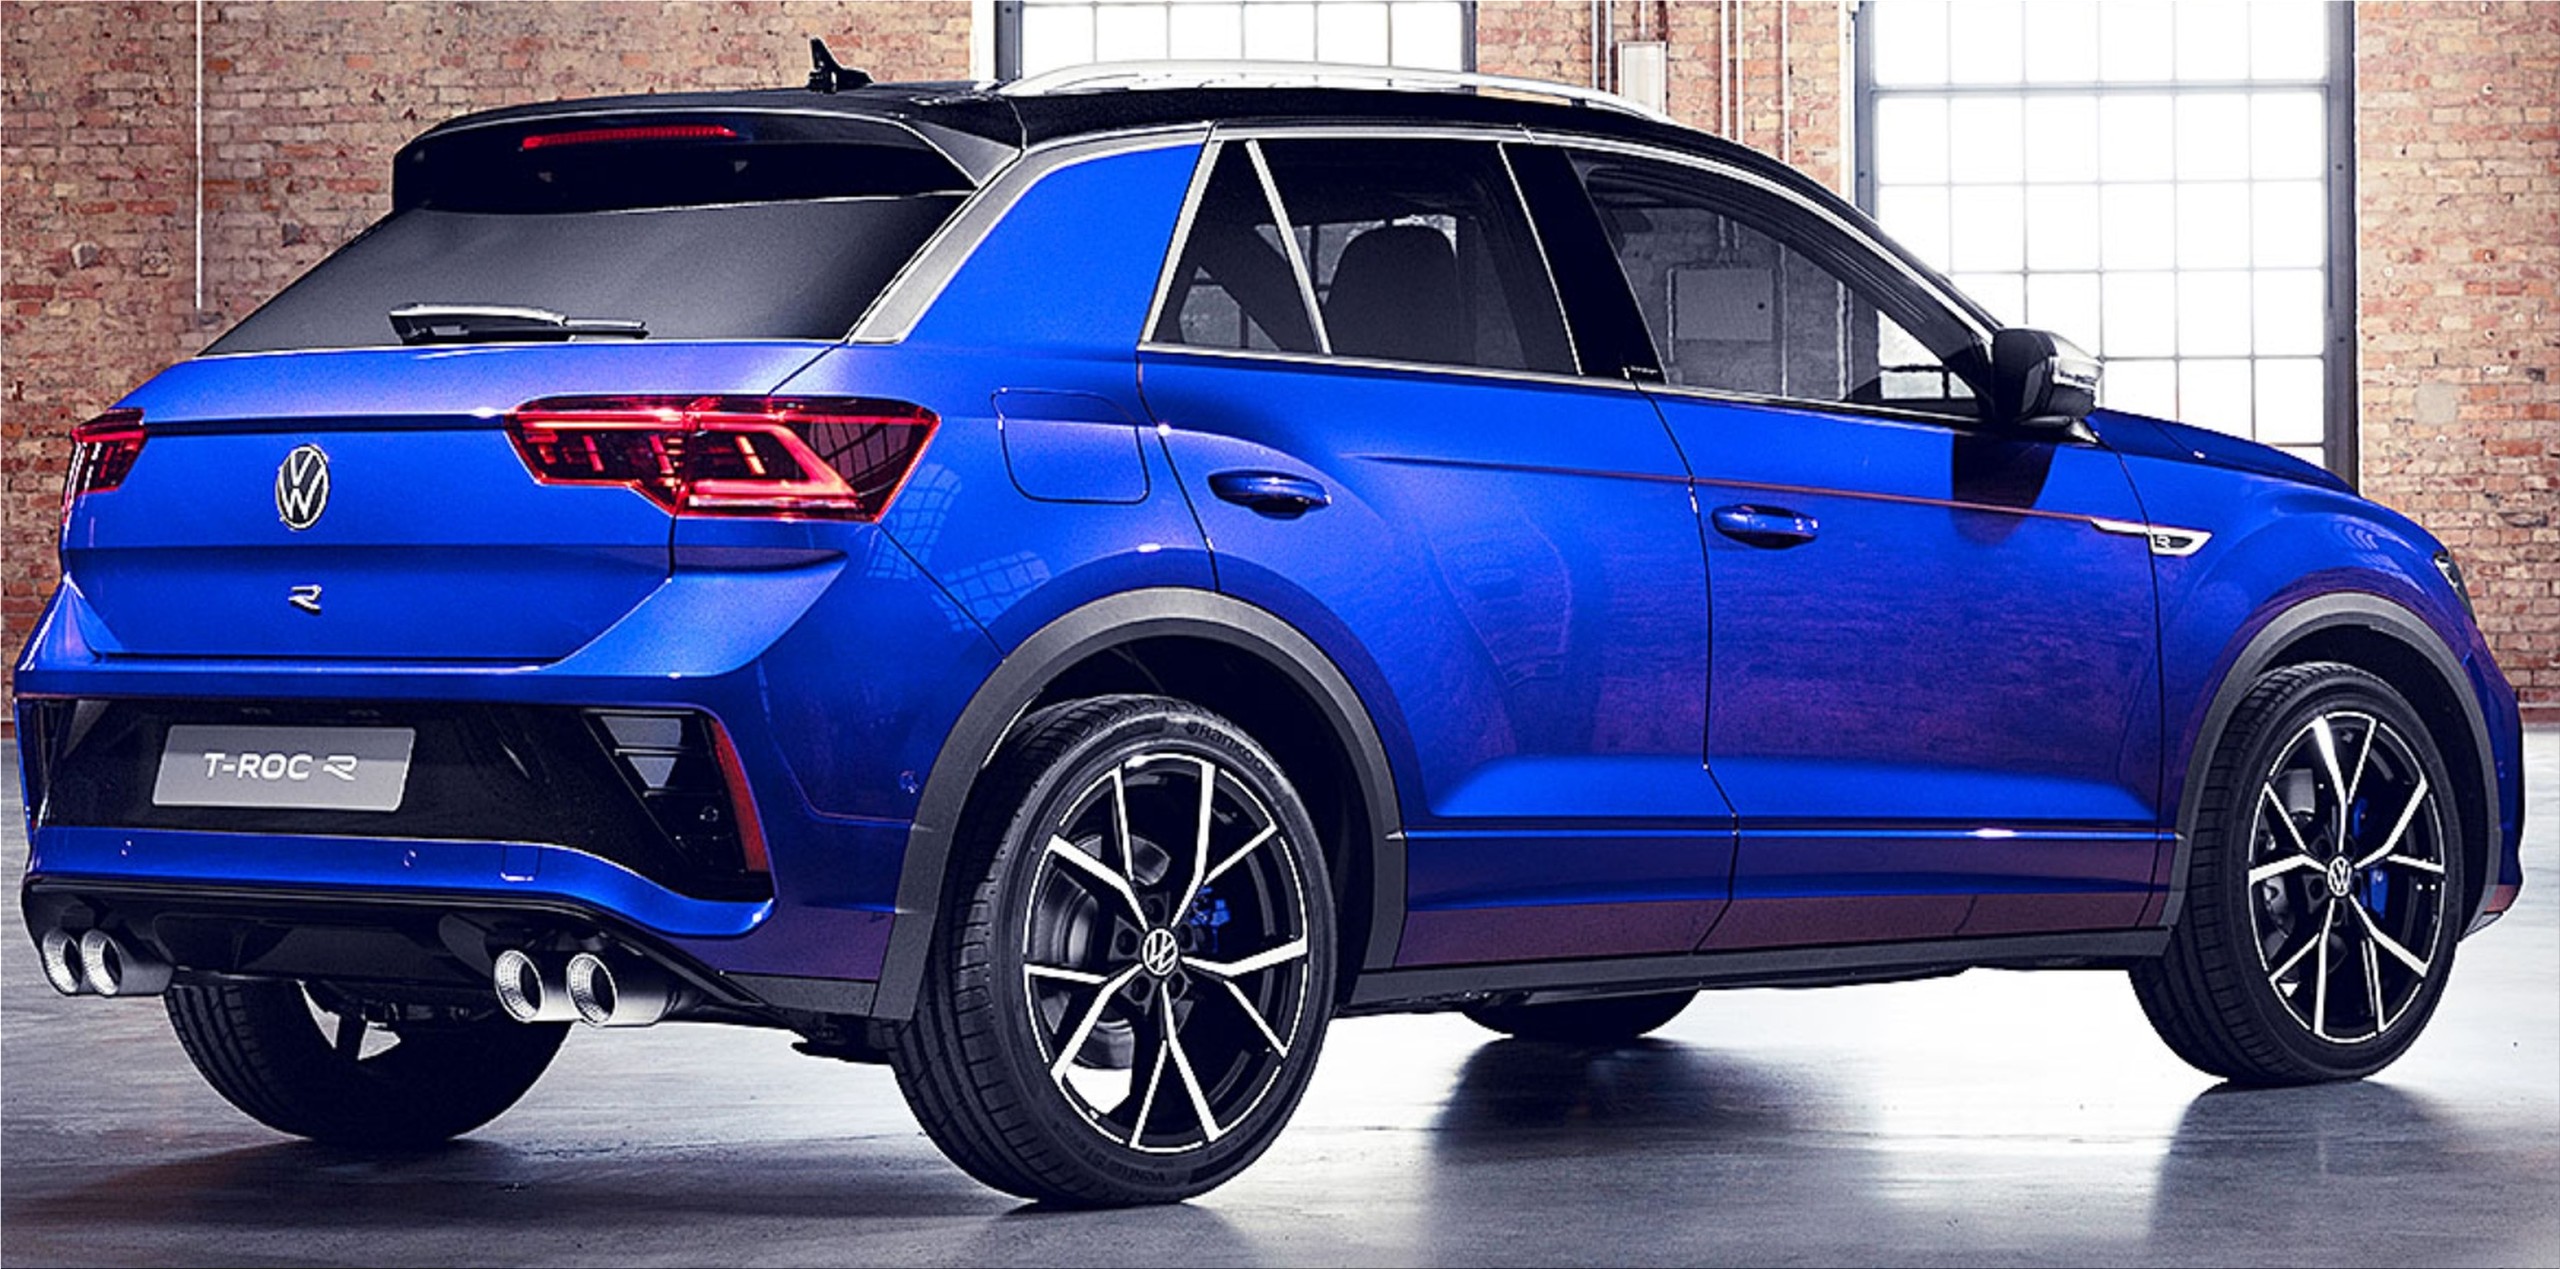 The new Volkswagen TRoc compact SUV arrives in spring